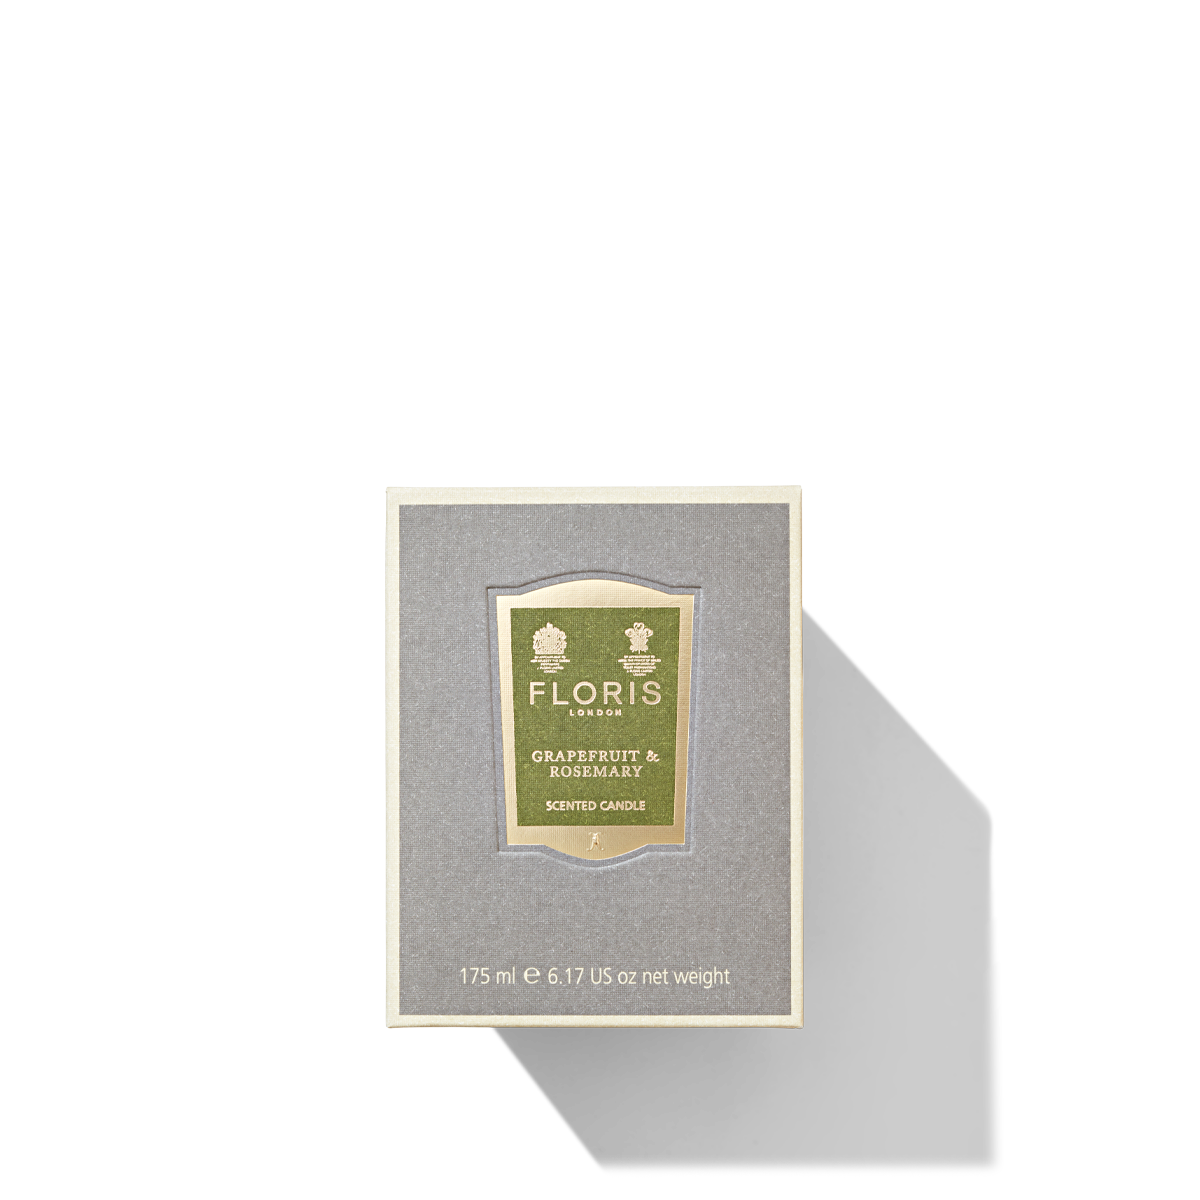 Grey and Green Floris London Grapefruit & Rosemary Scented Candle Box